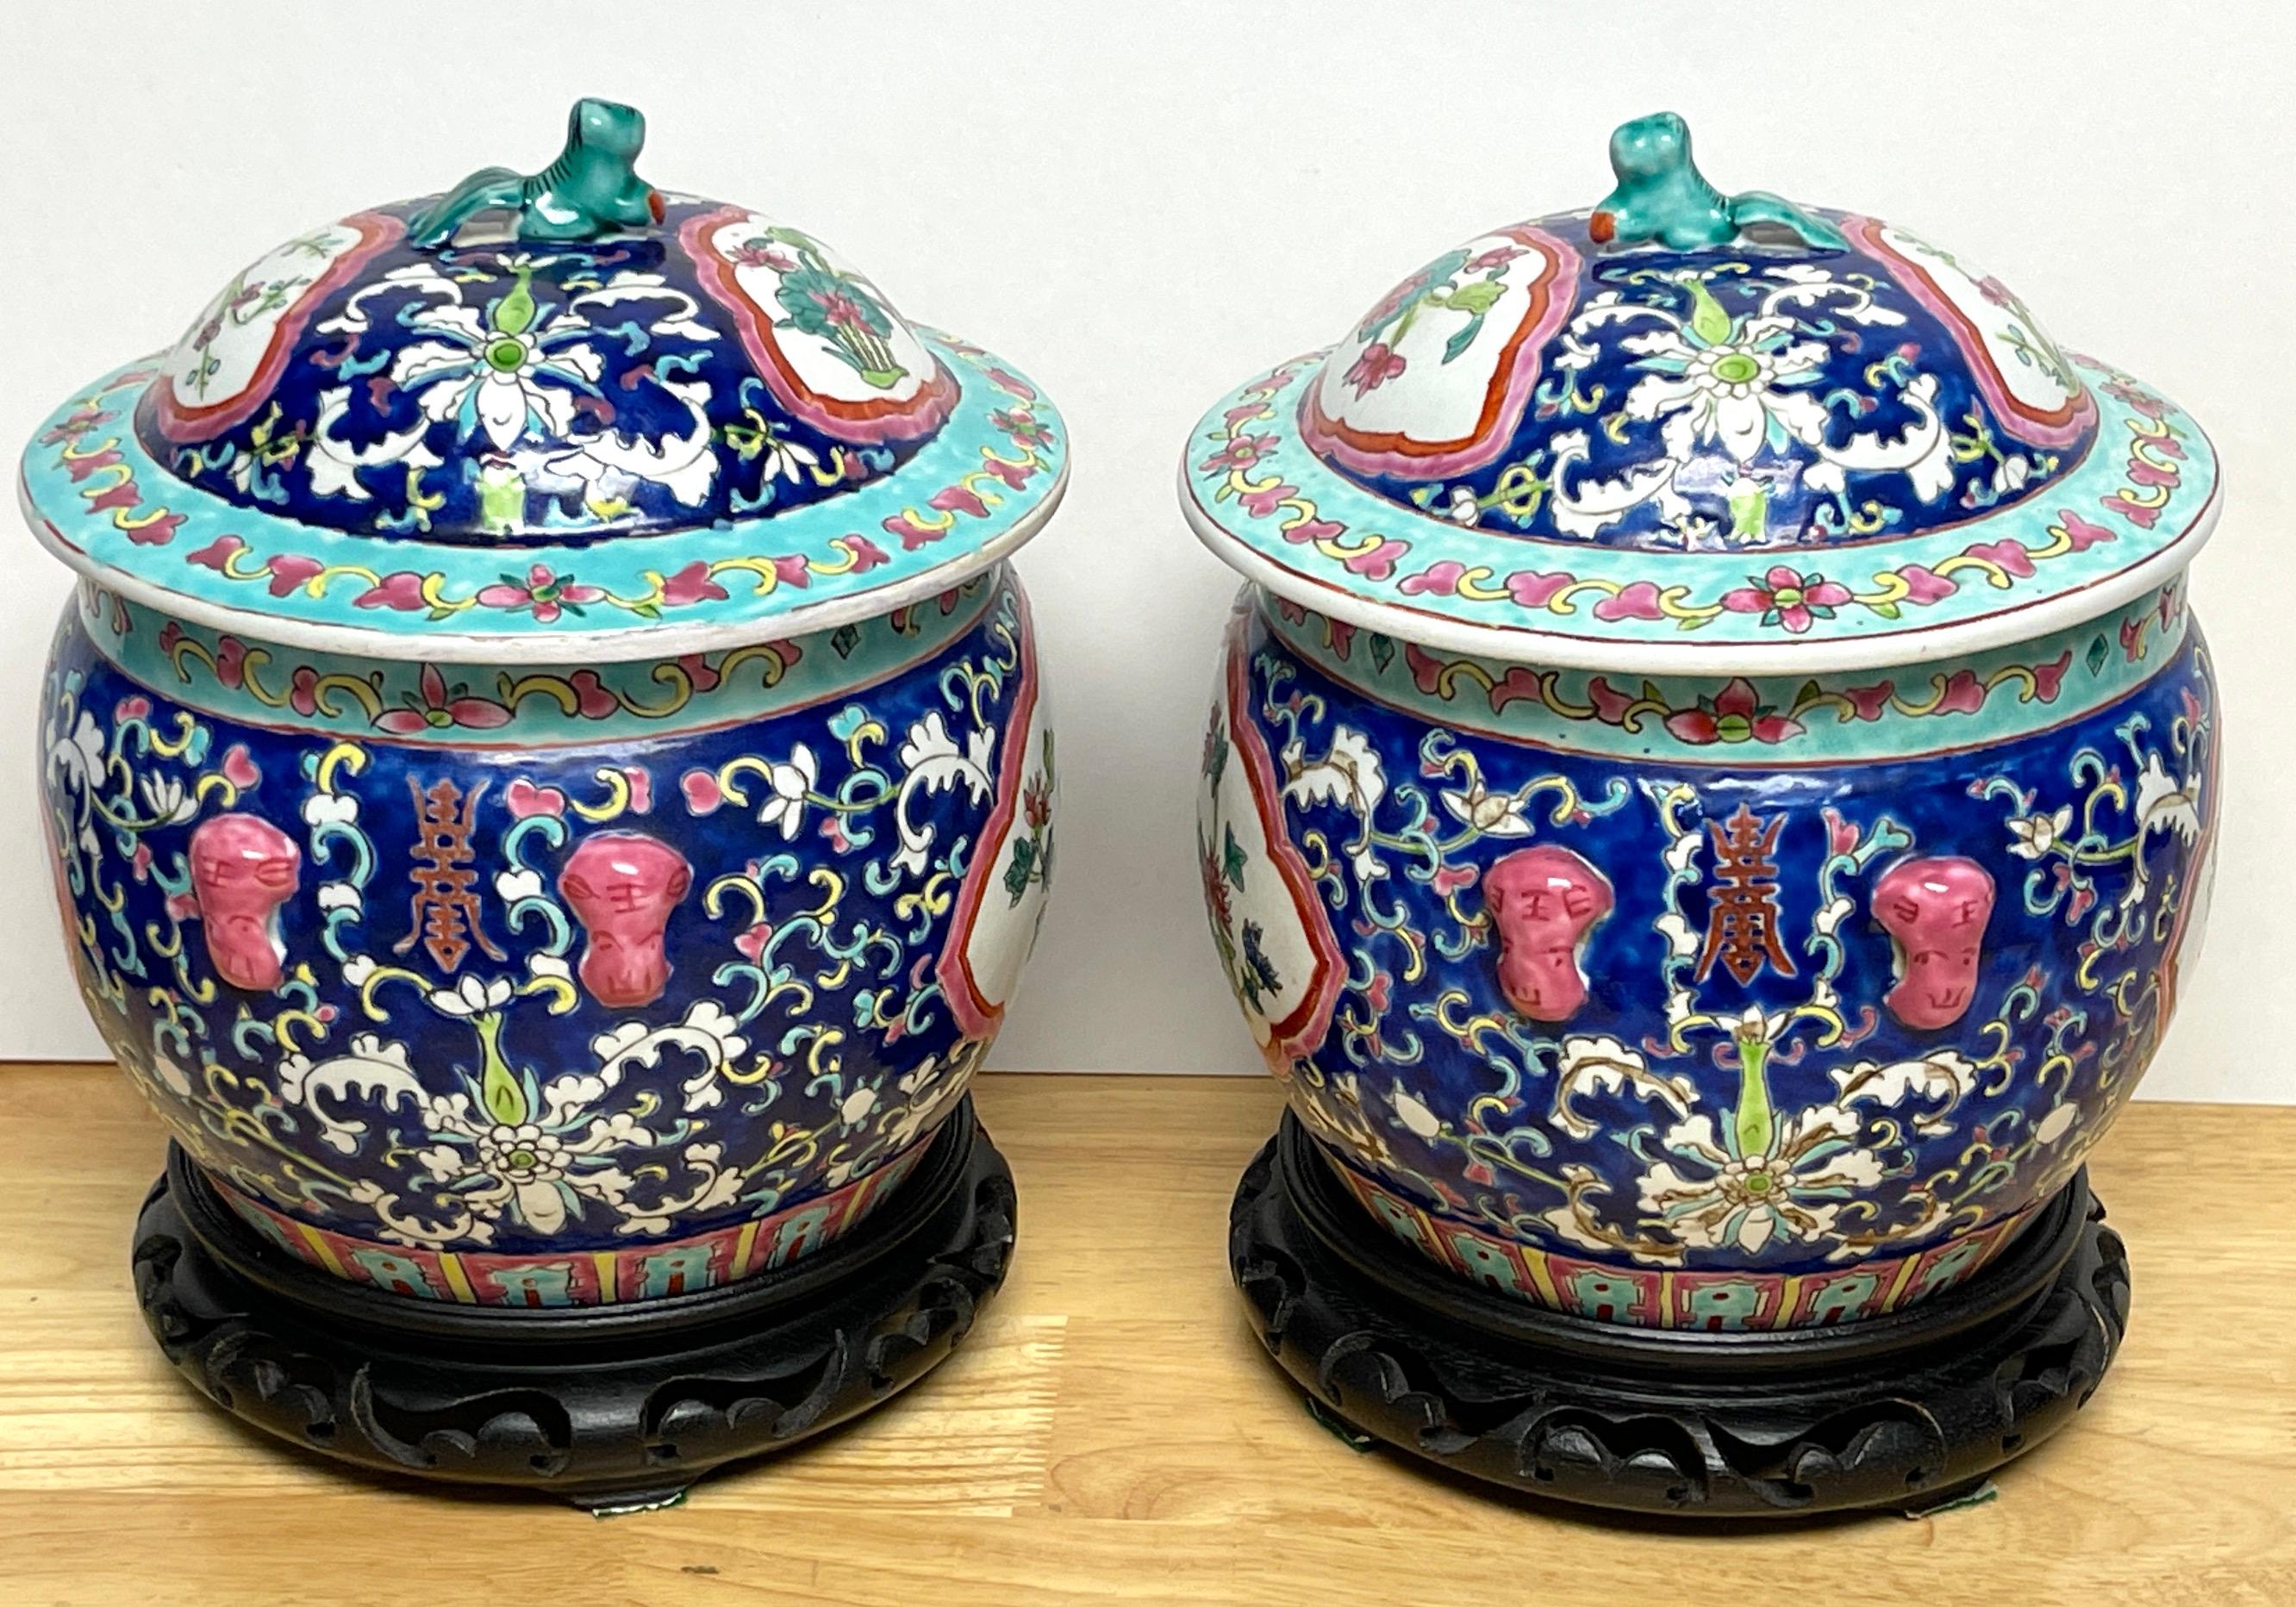 Pair of Chinese Export Famille-Rose Enameled Covered Urns & Stands  In Good Condition For Sale In West Palm Beach, FL